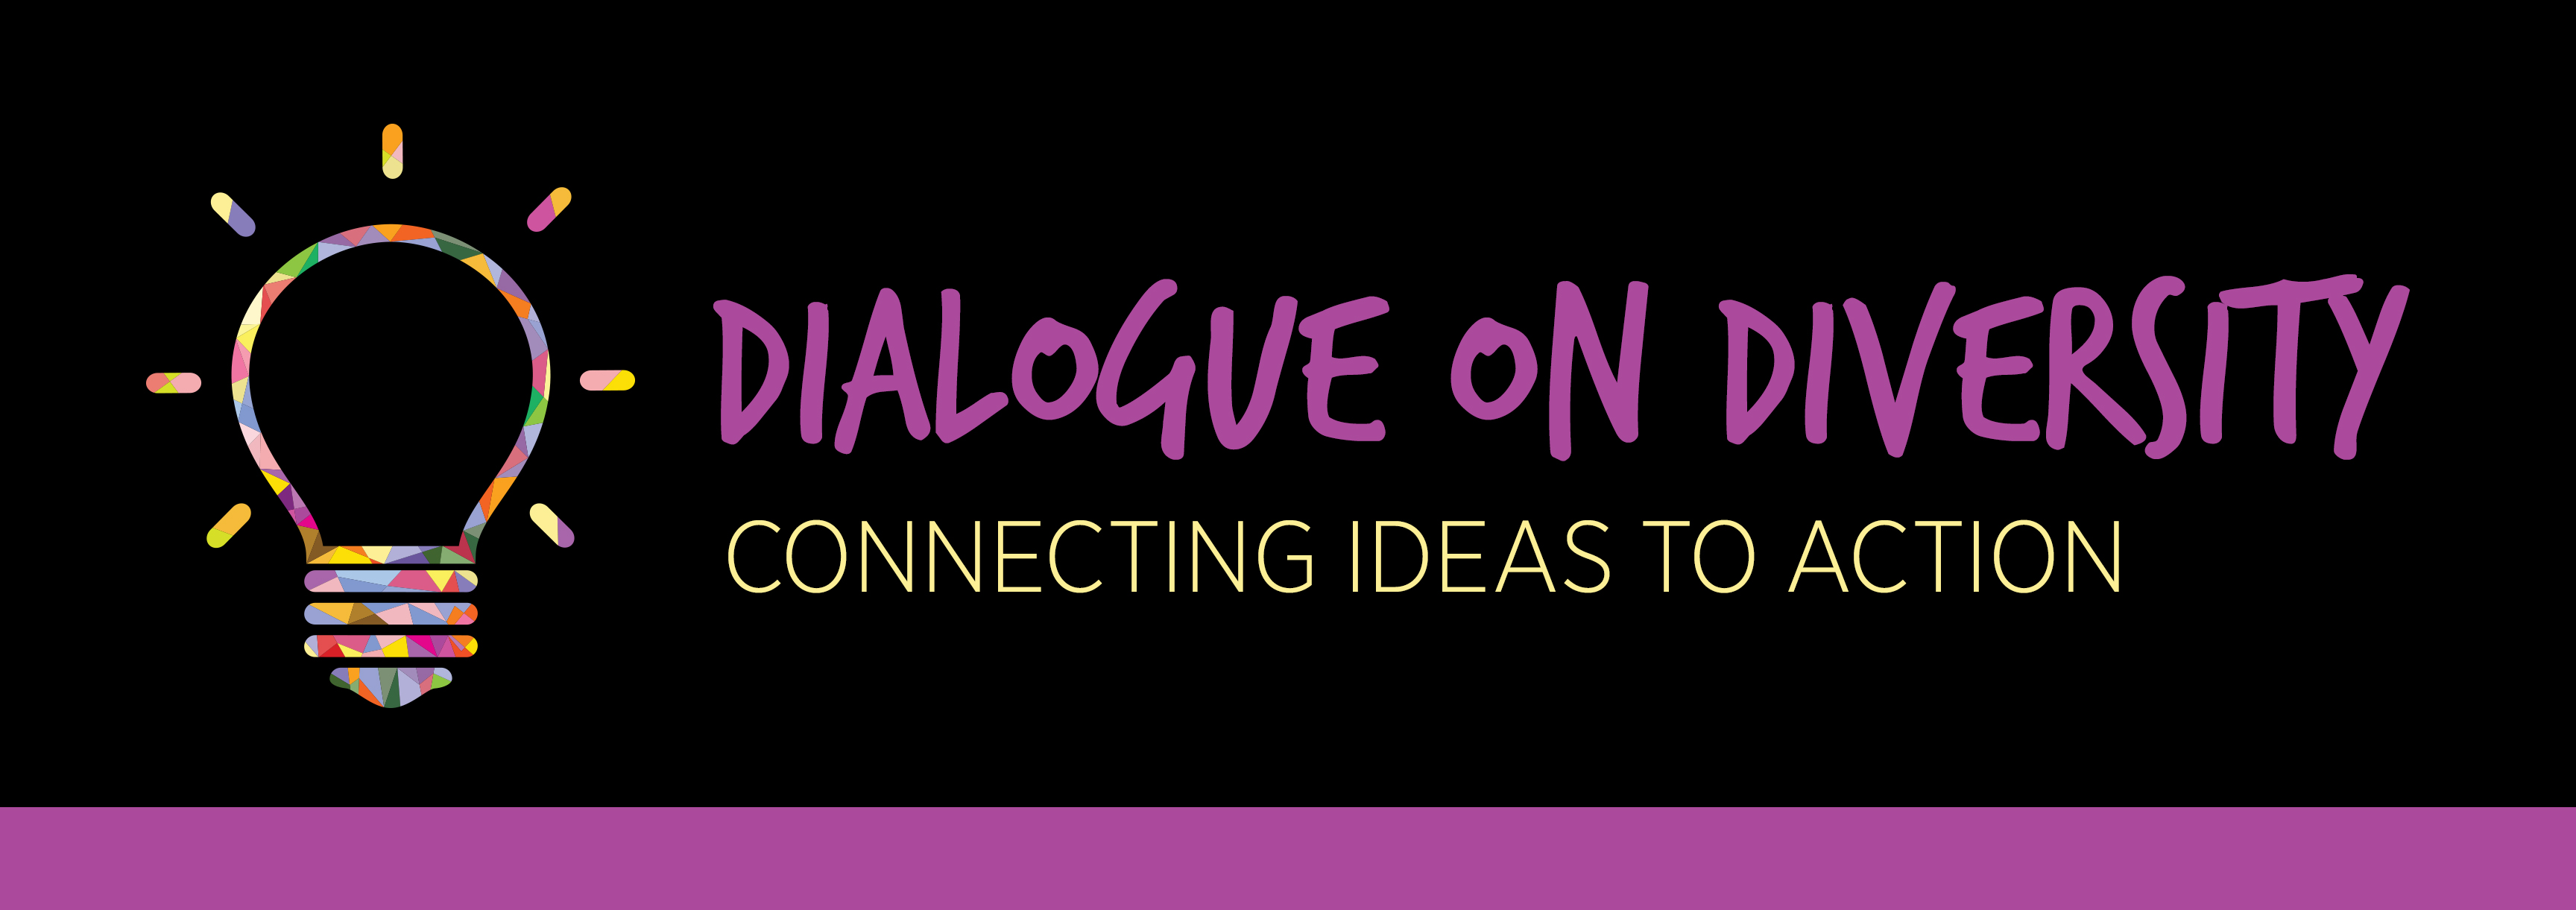 Dialogue on Diversity: Connecting Ideas to Action